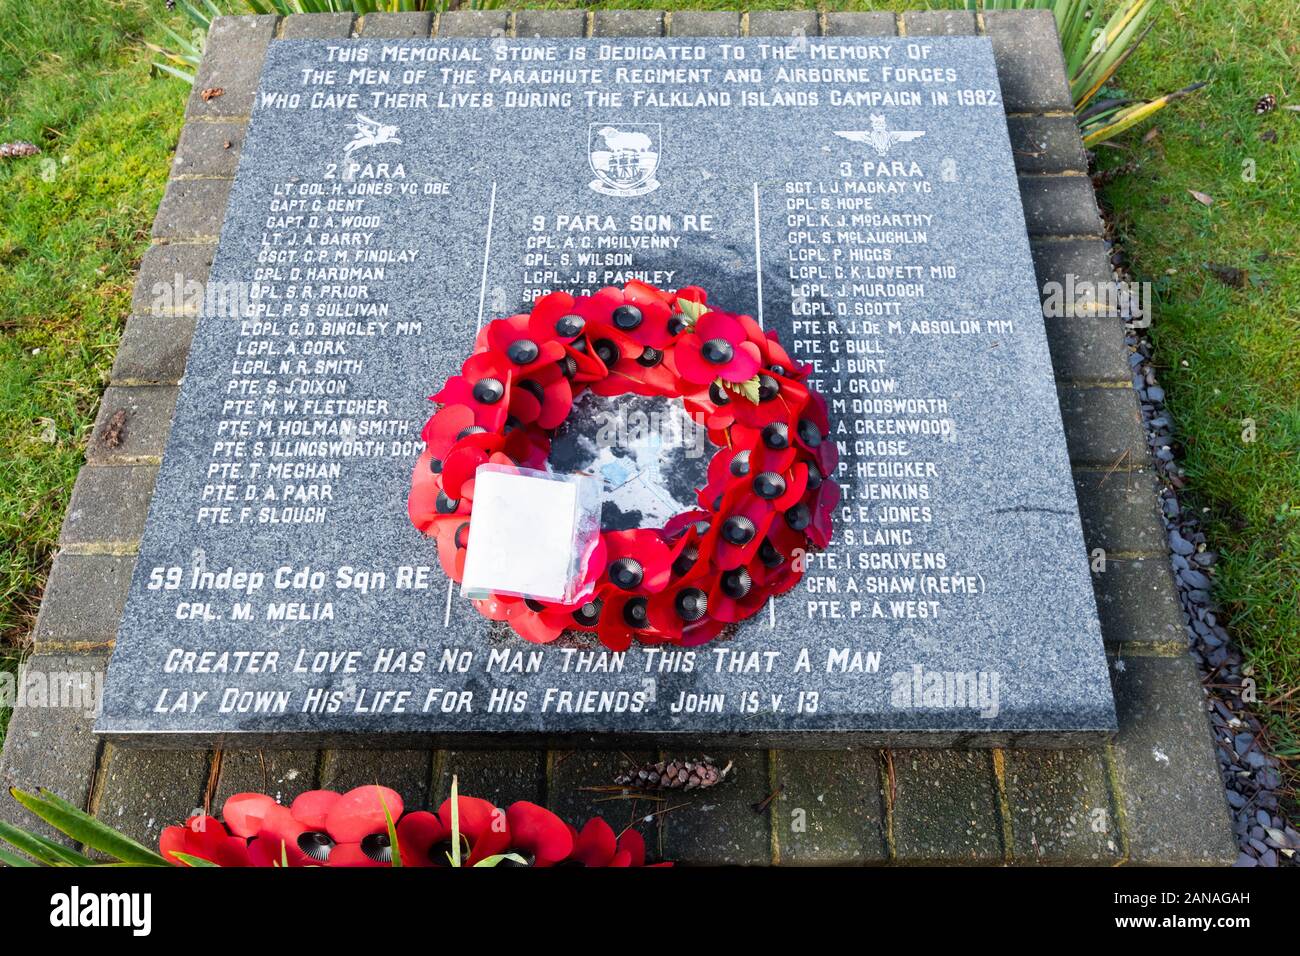 Memorial stone dedicated to the parachute regiment and airborne forces killed during the Falklands War, Aldershot Military Cemetery, Hampshire, UK Stock Photo